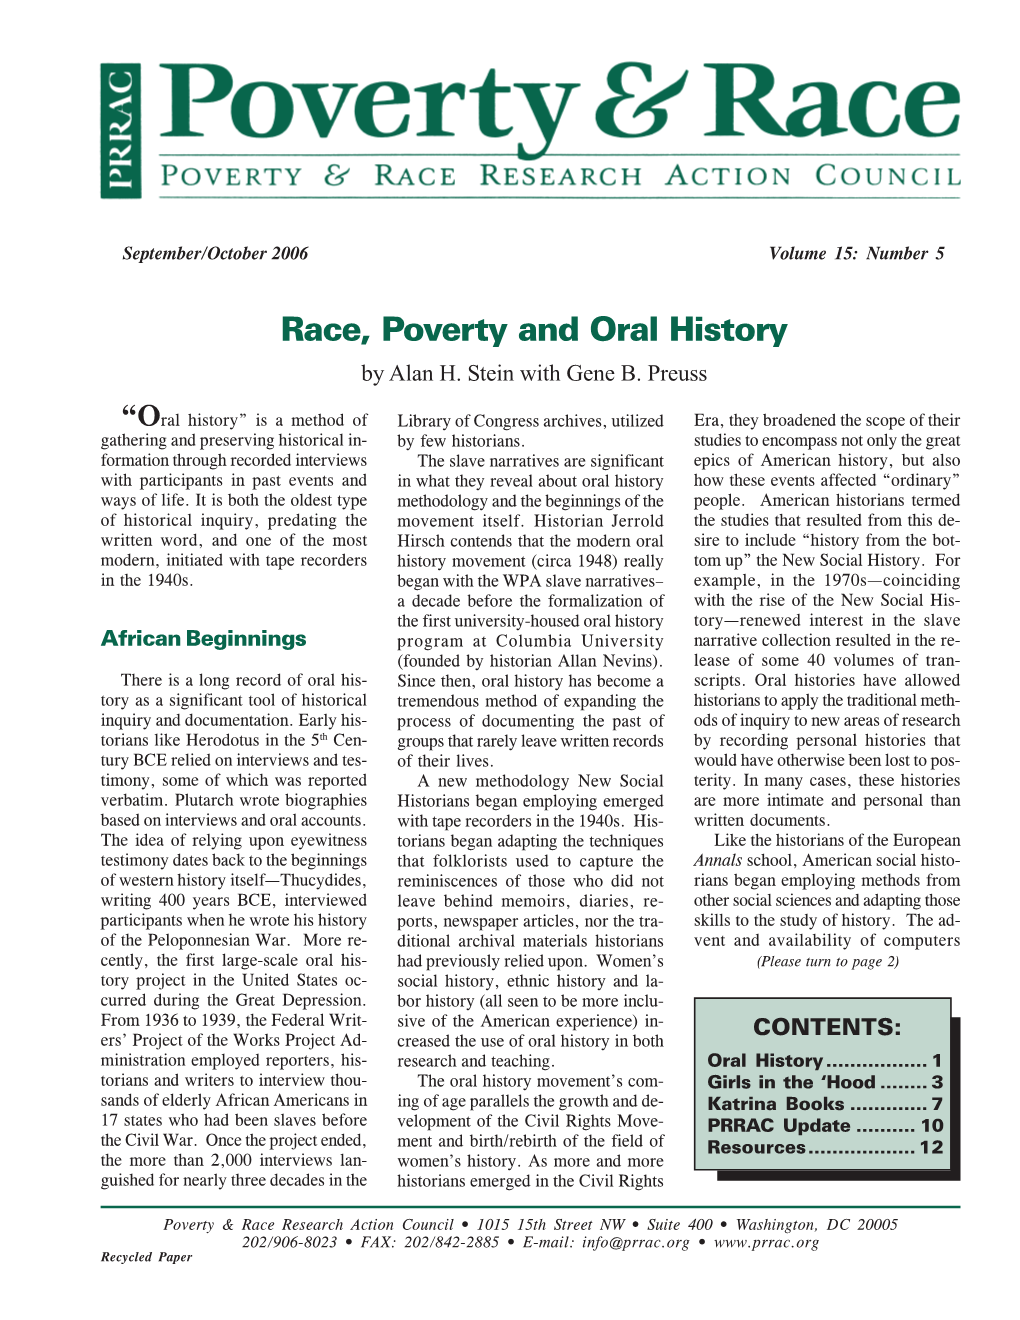 Race, Poverty and Oral History by Alan H